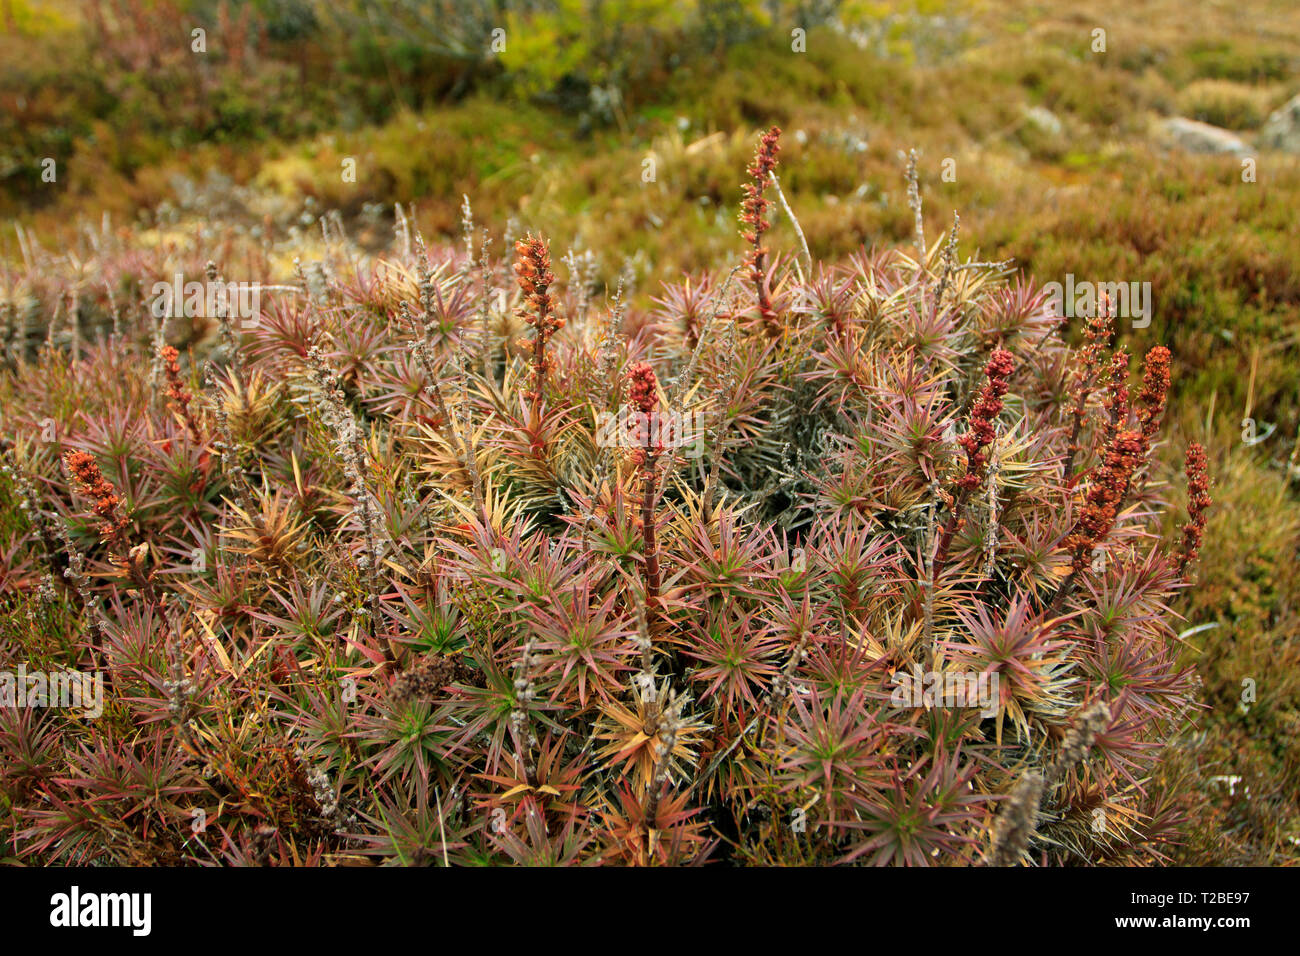 Richea scoparia, close up view of a heath shrub on the plateau on Ben Lomond National Park in northern Tasmania.   This plant is endemic to Tasmania. Stock Photo